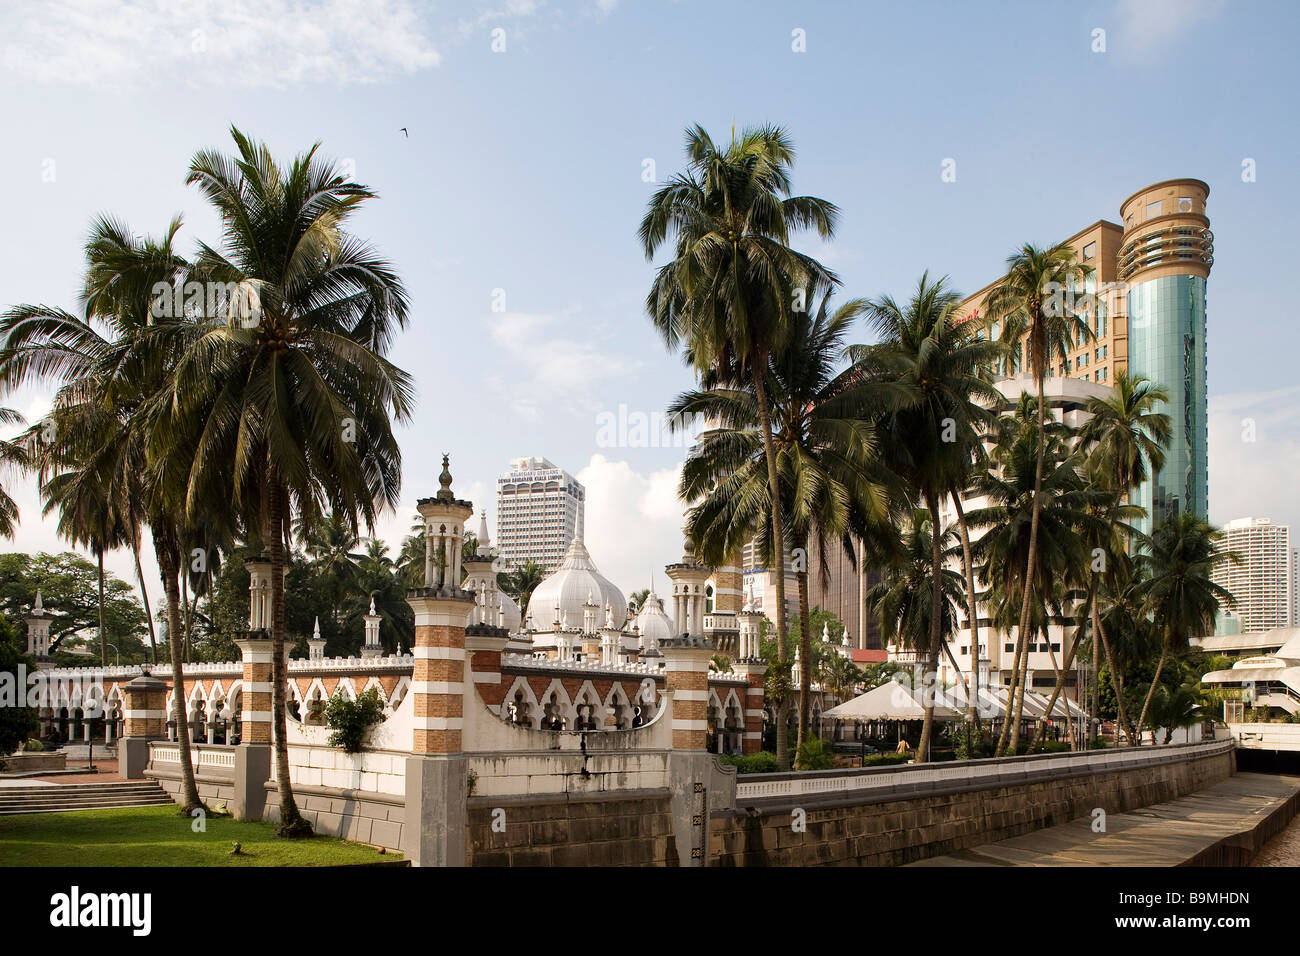 Malaysia, Kuala Lumpur, downtown, Masjid Jamek mosque built at the confluence of the Klang and Gombak rivers, the town Stock Photo